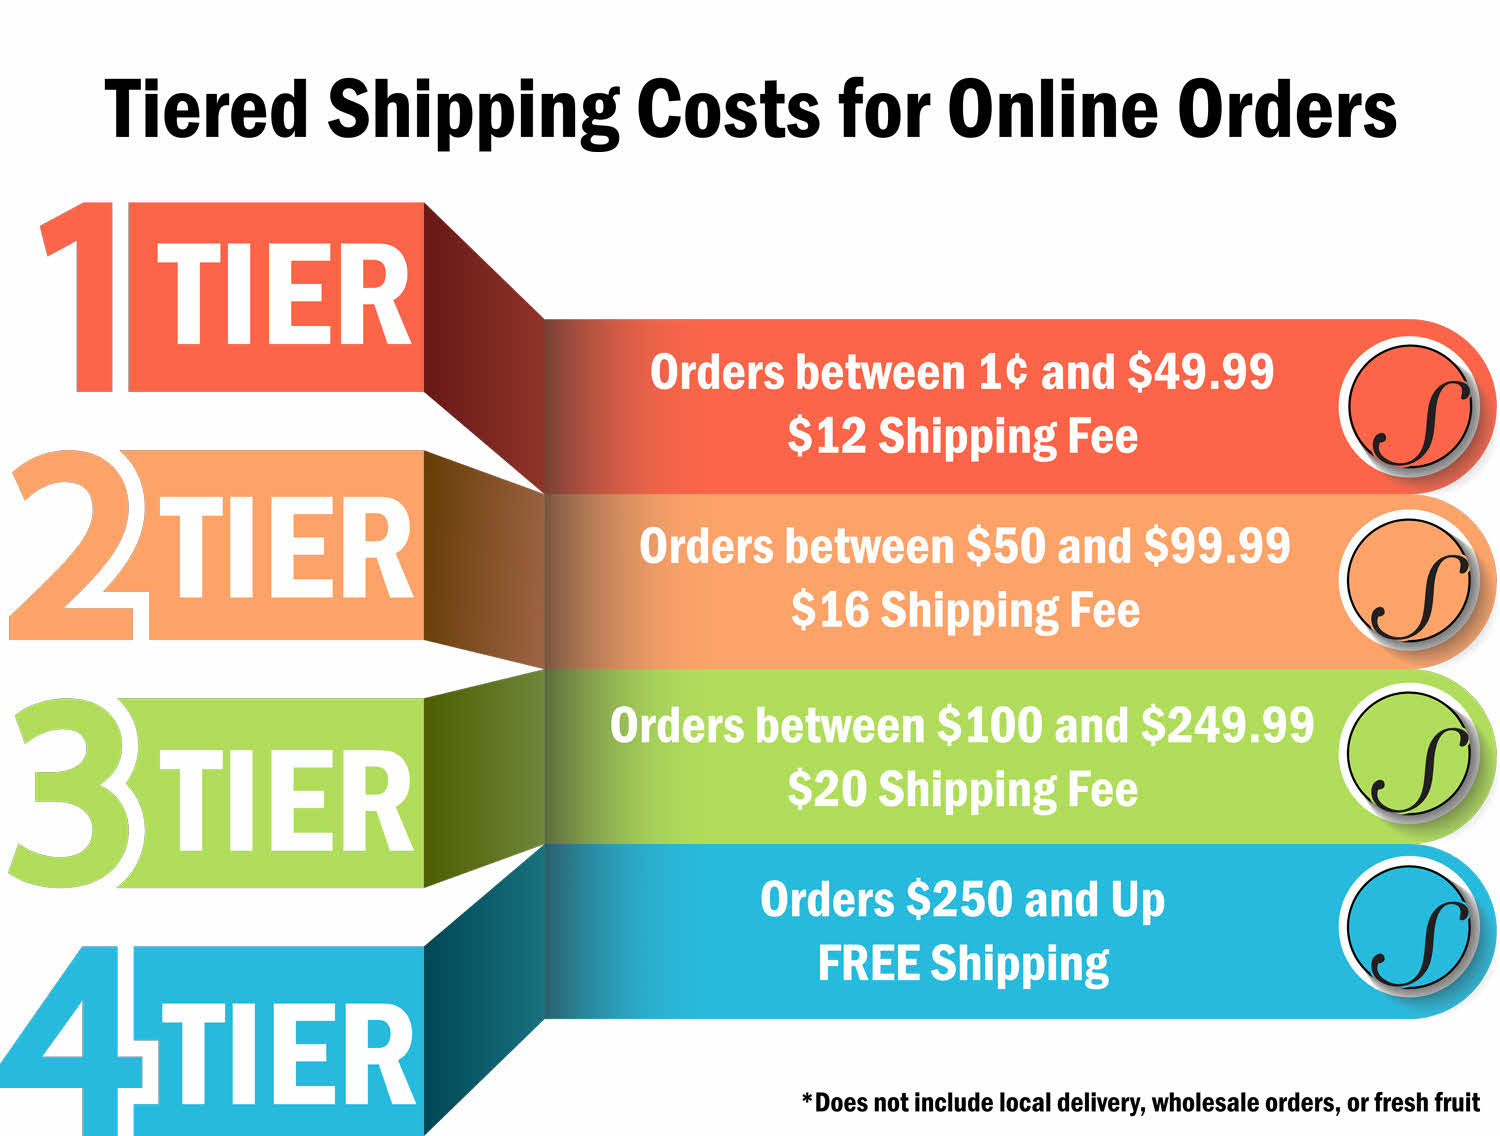 Tiered Shipping Costs